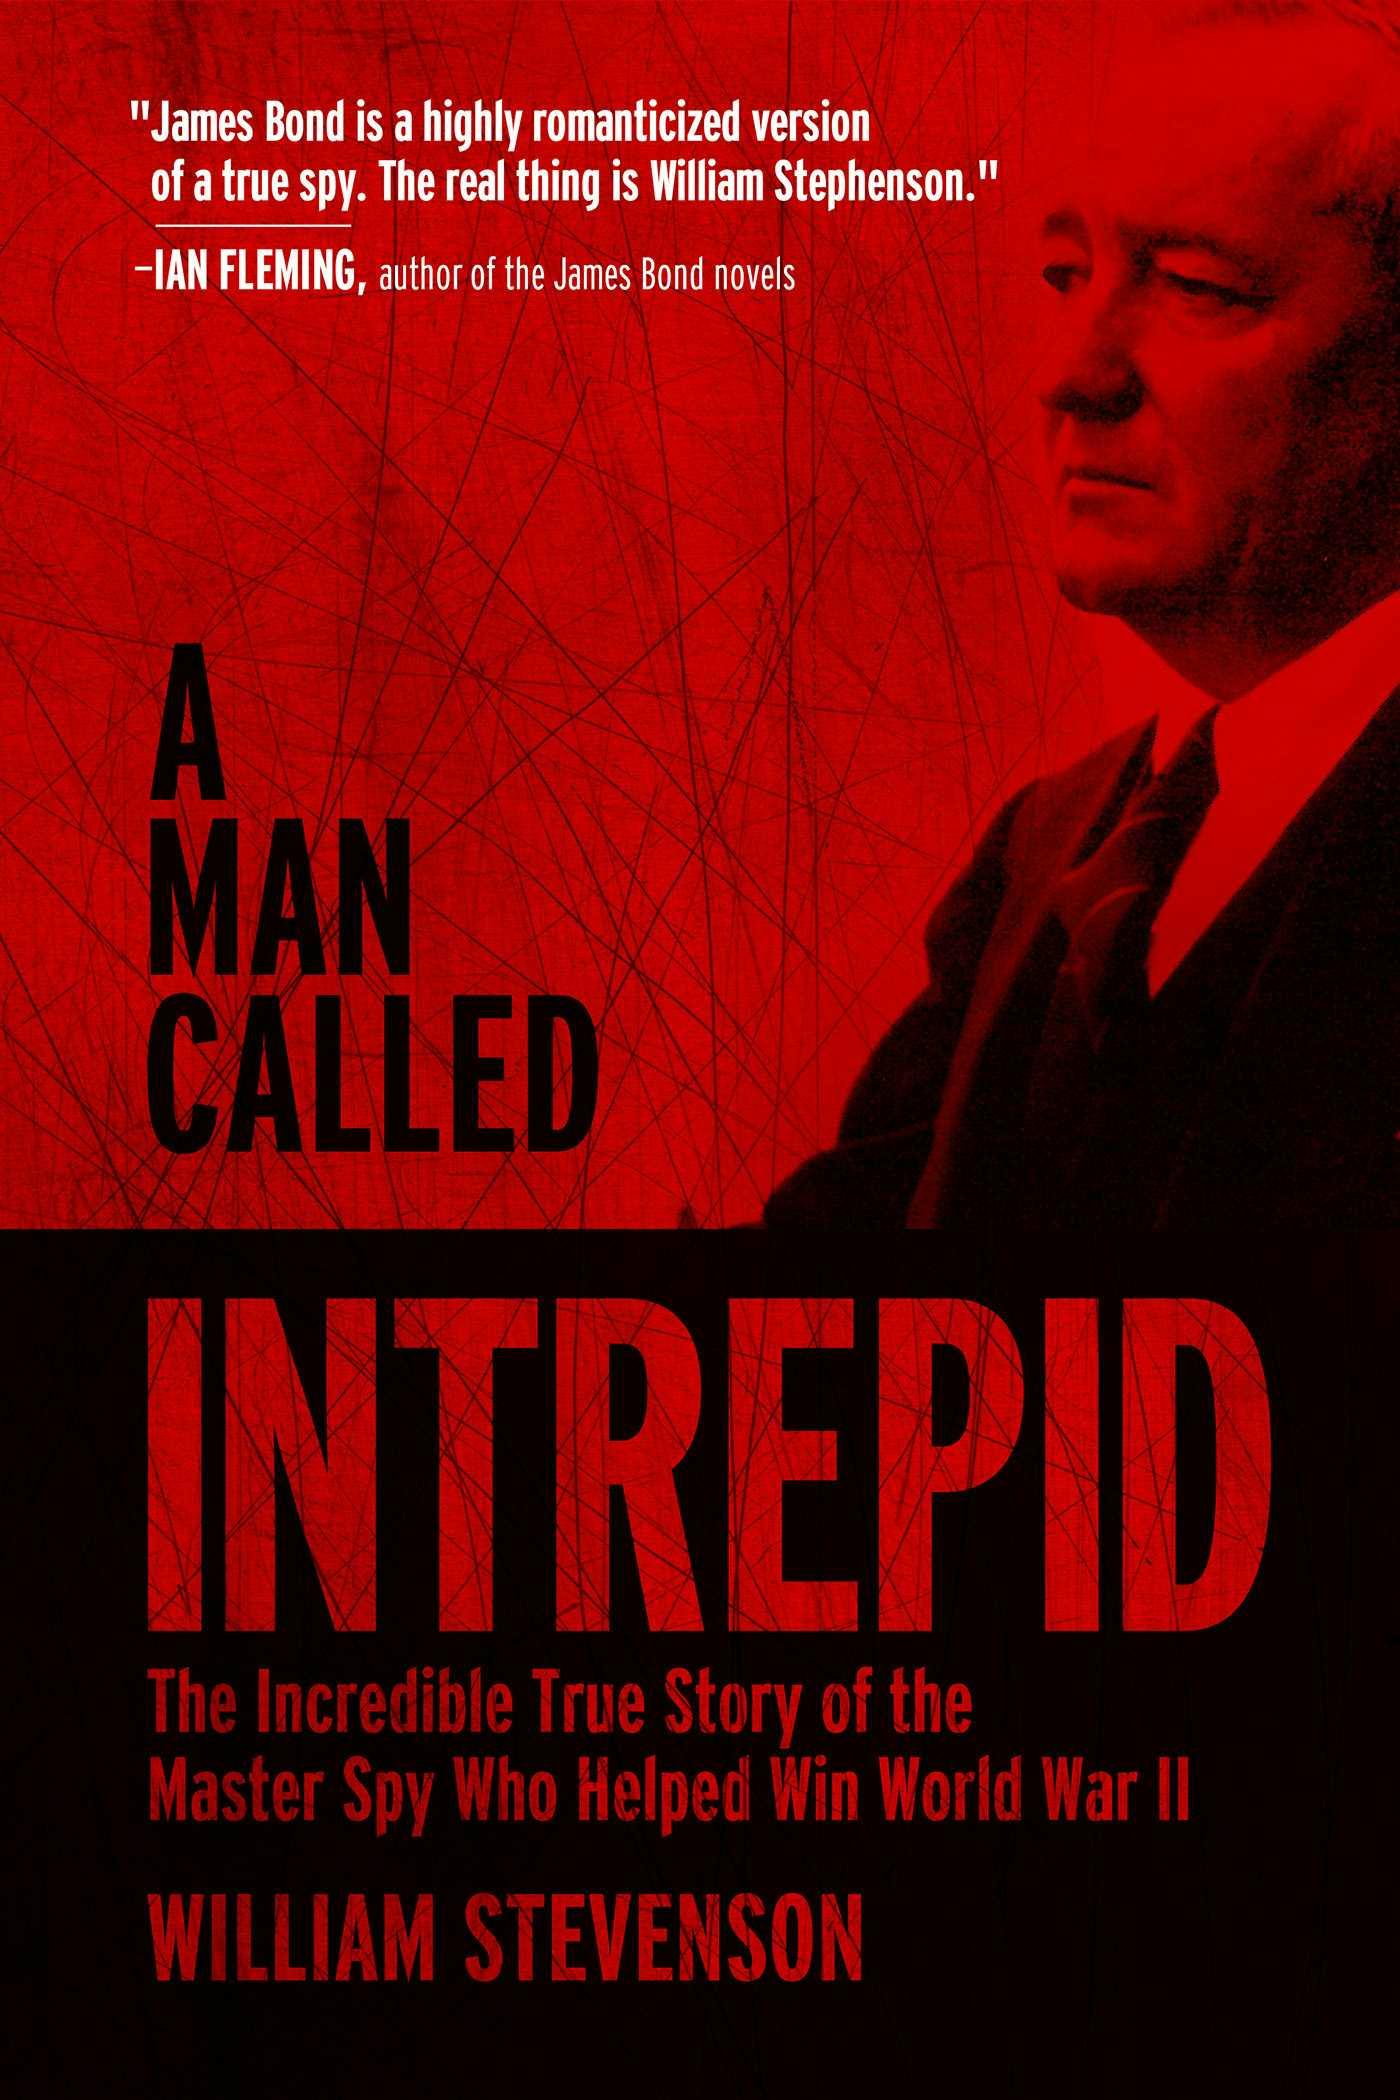 A Man Called Intrepid: The Incredible True Story of the Master Spy Who Helped Win World War II - William Stevenson